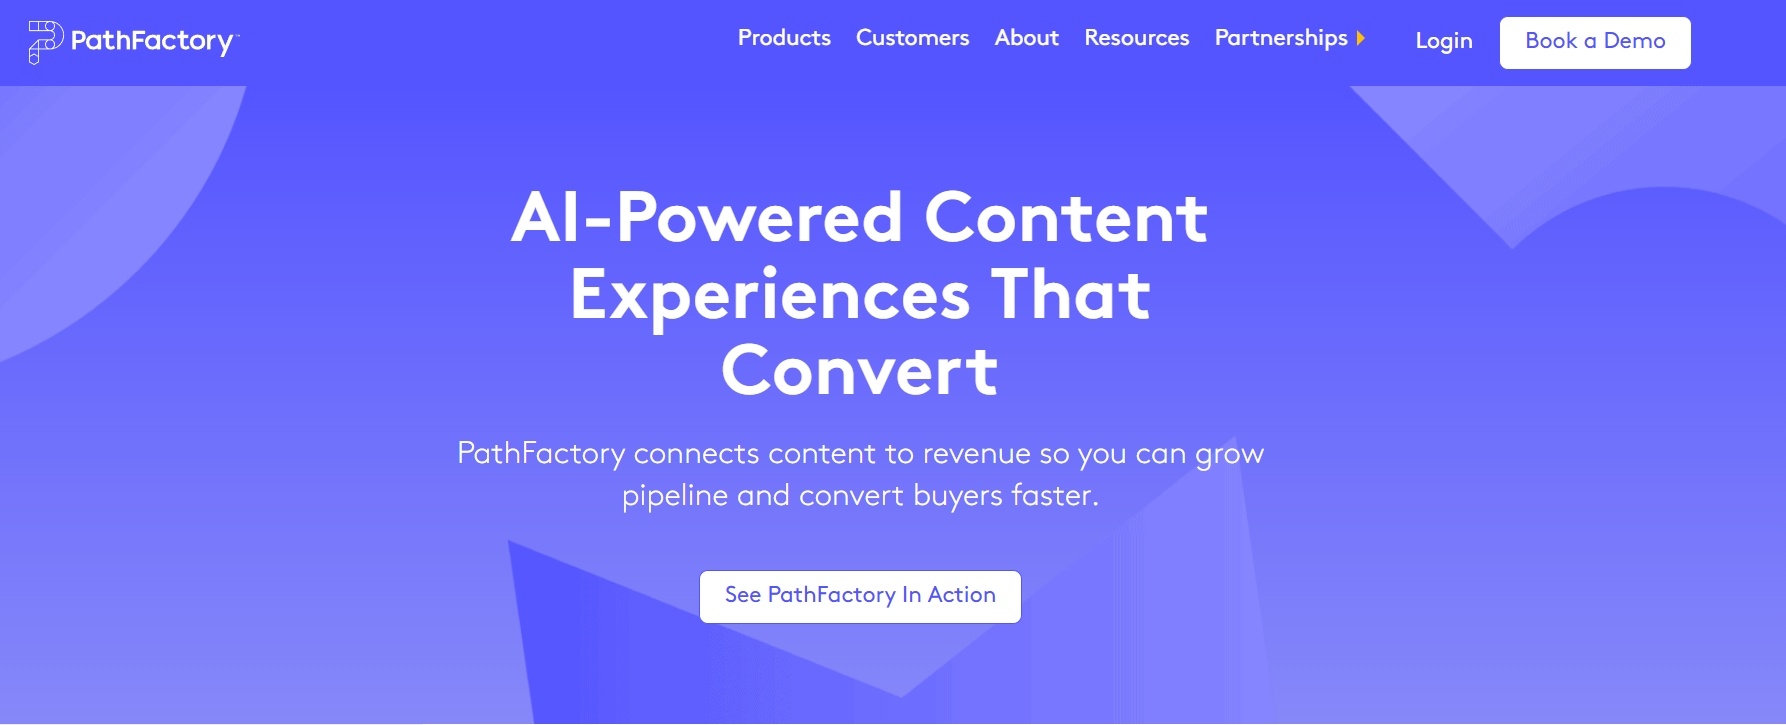 PathFactory uses artificial intelligence to automate personalized content delivery